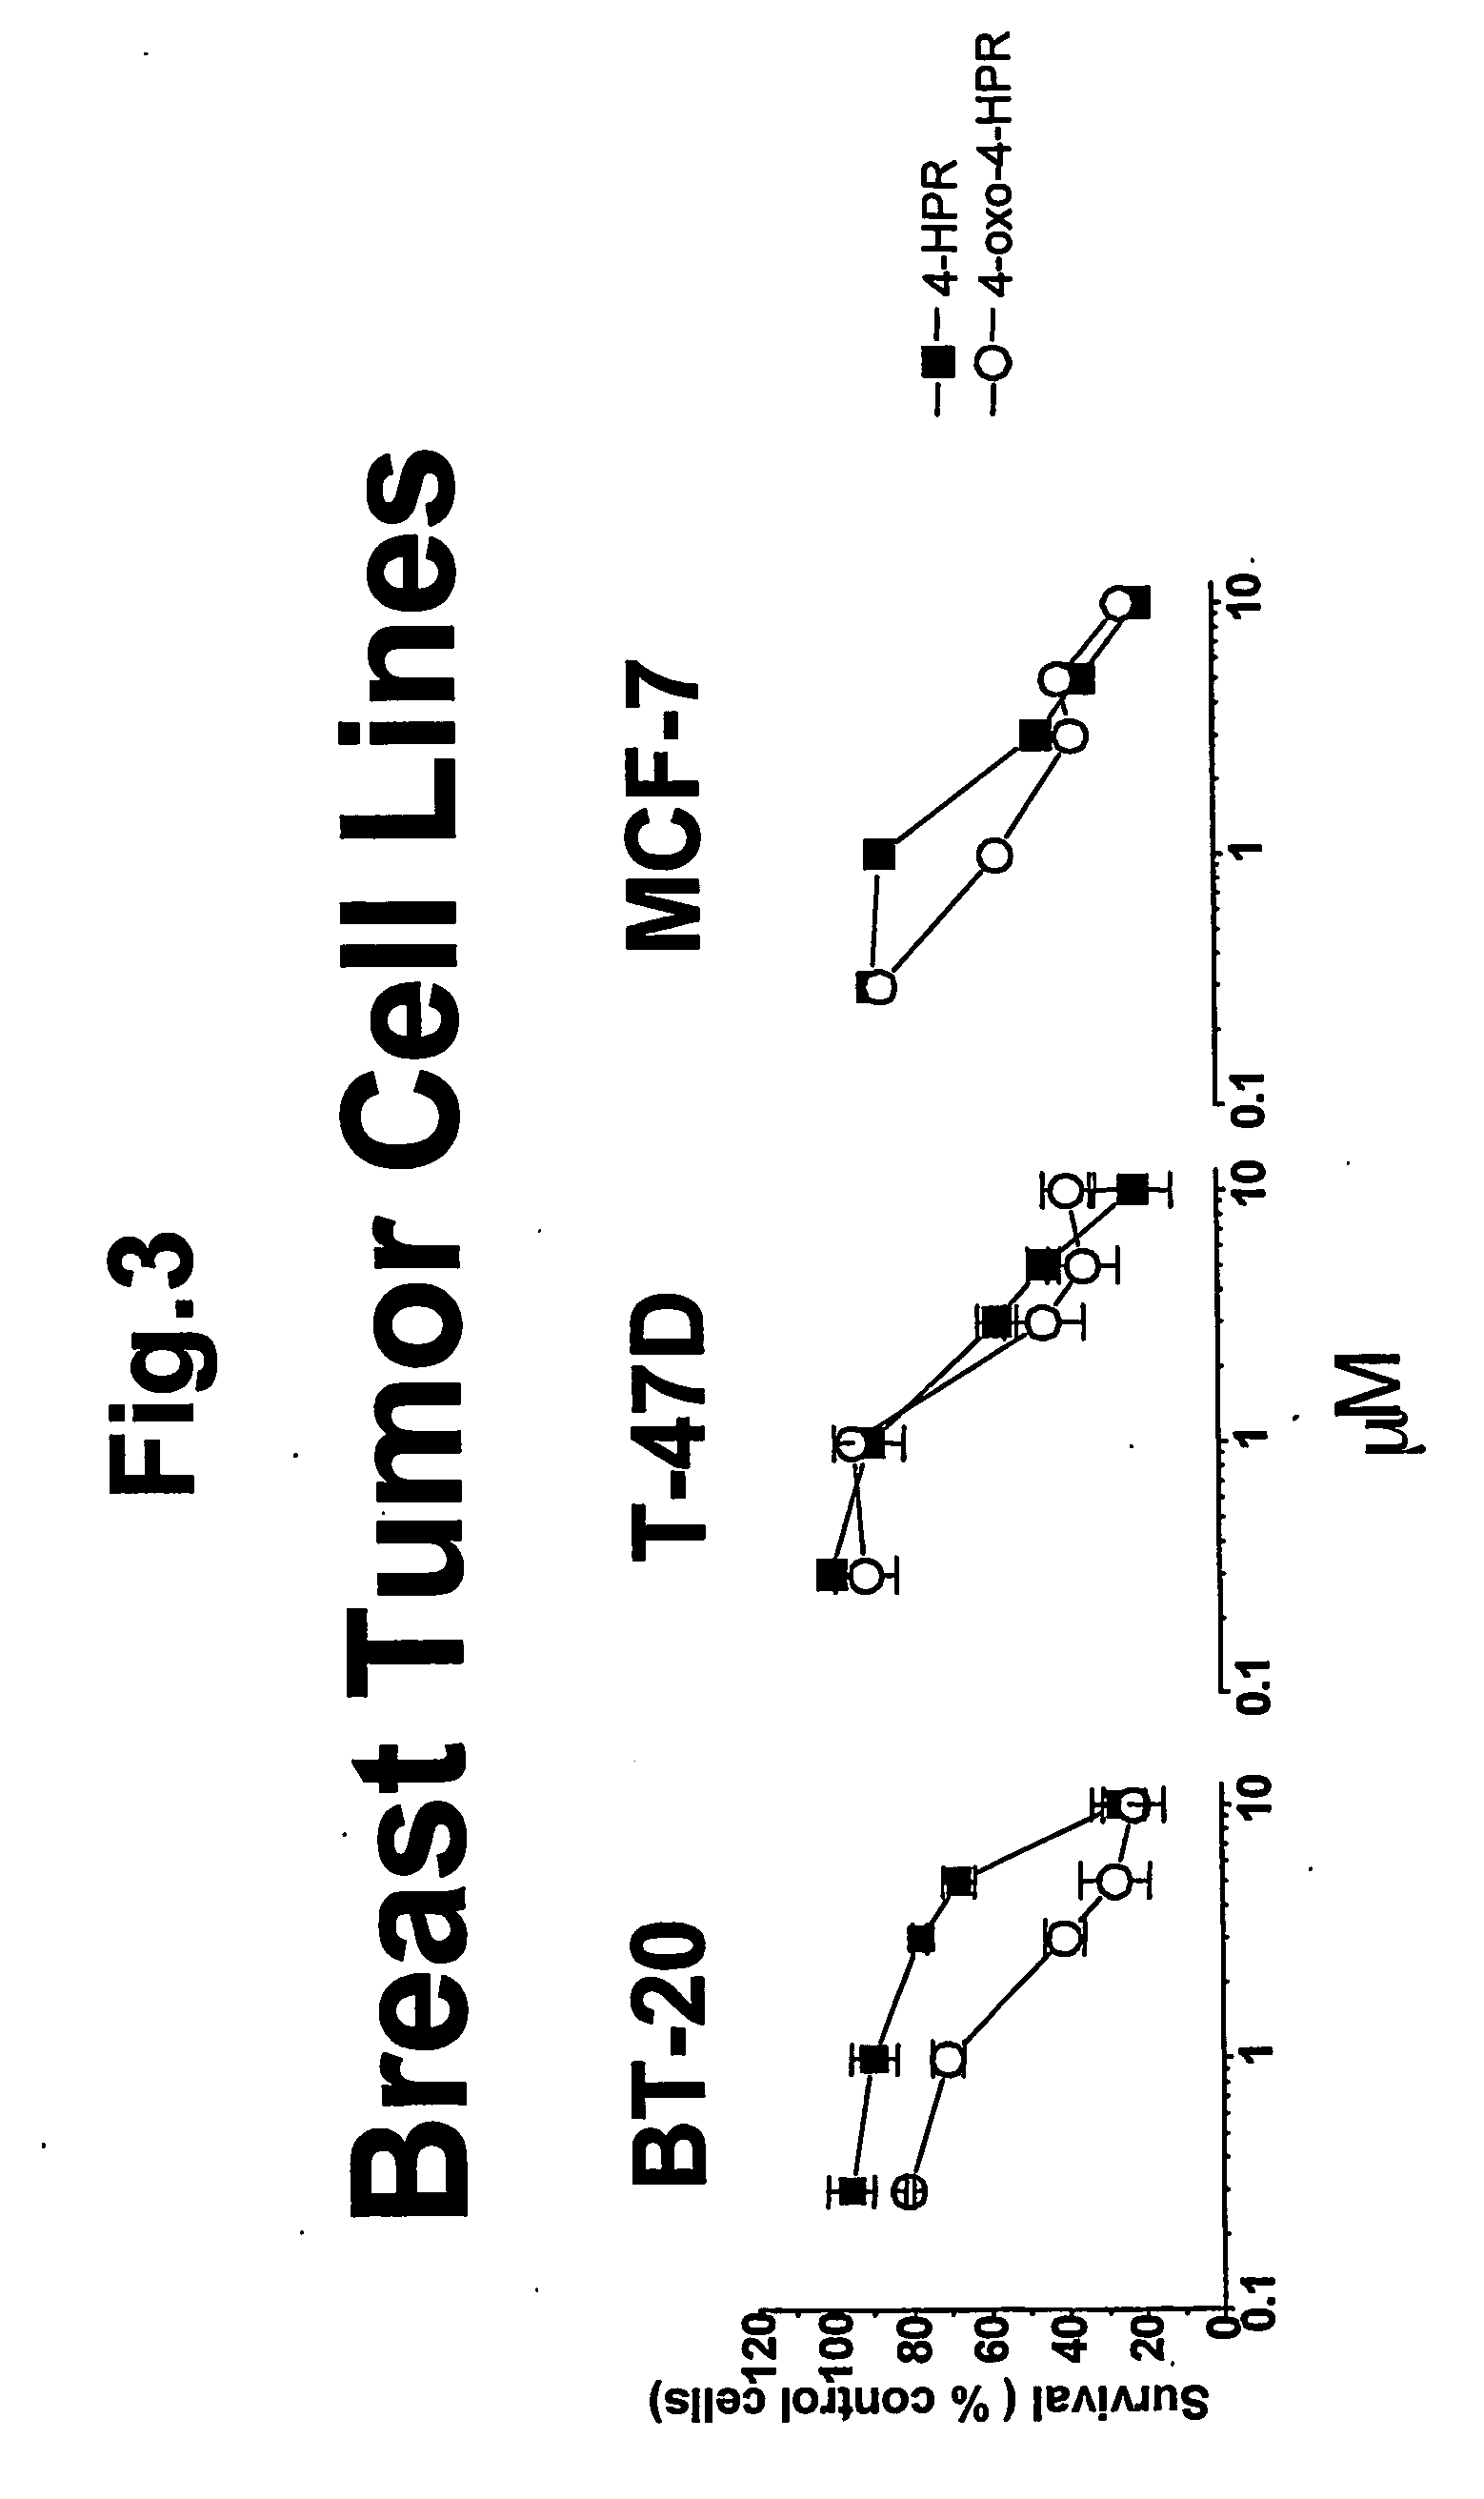 4-oxo-fenretinide, administered alone and in combination with fenretinide, as preventive and therapeutic agent for cancer